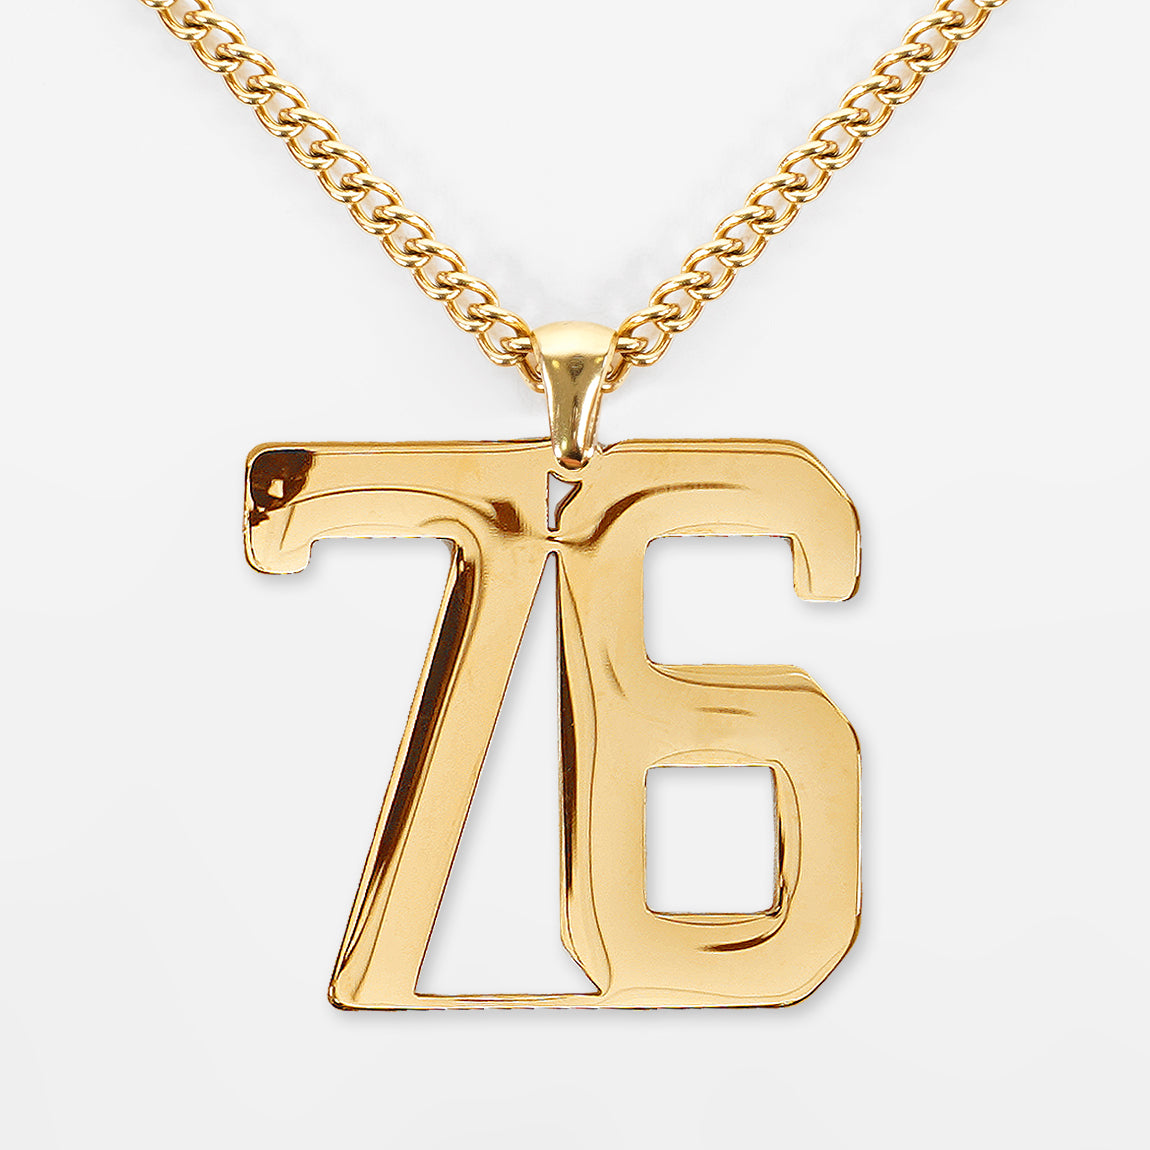 76 Number Pendant with Chain Necklace - Gold Plated Stainless Steel